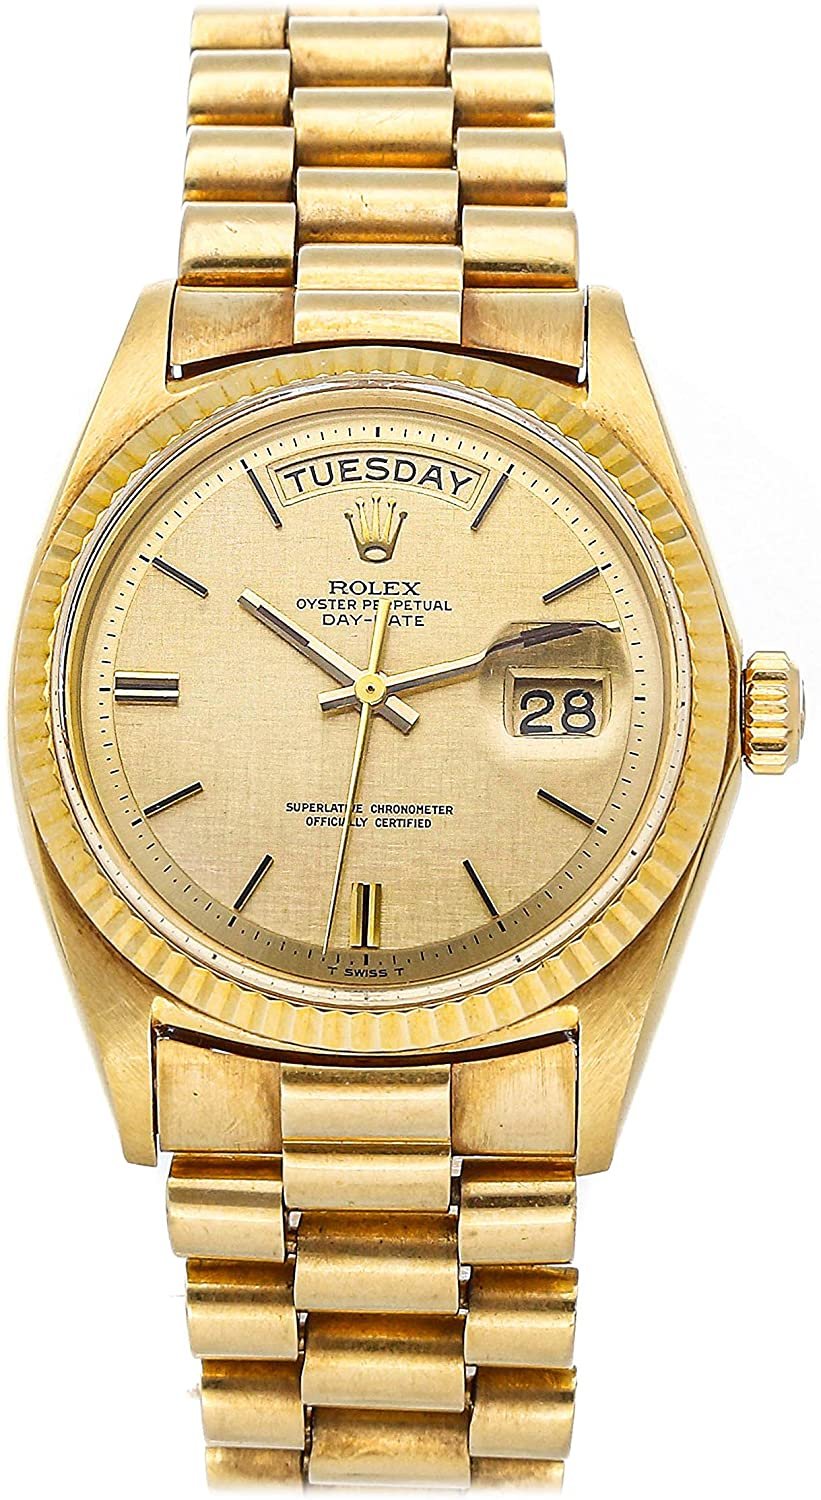 The ultimate guide to the Rolex President watch